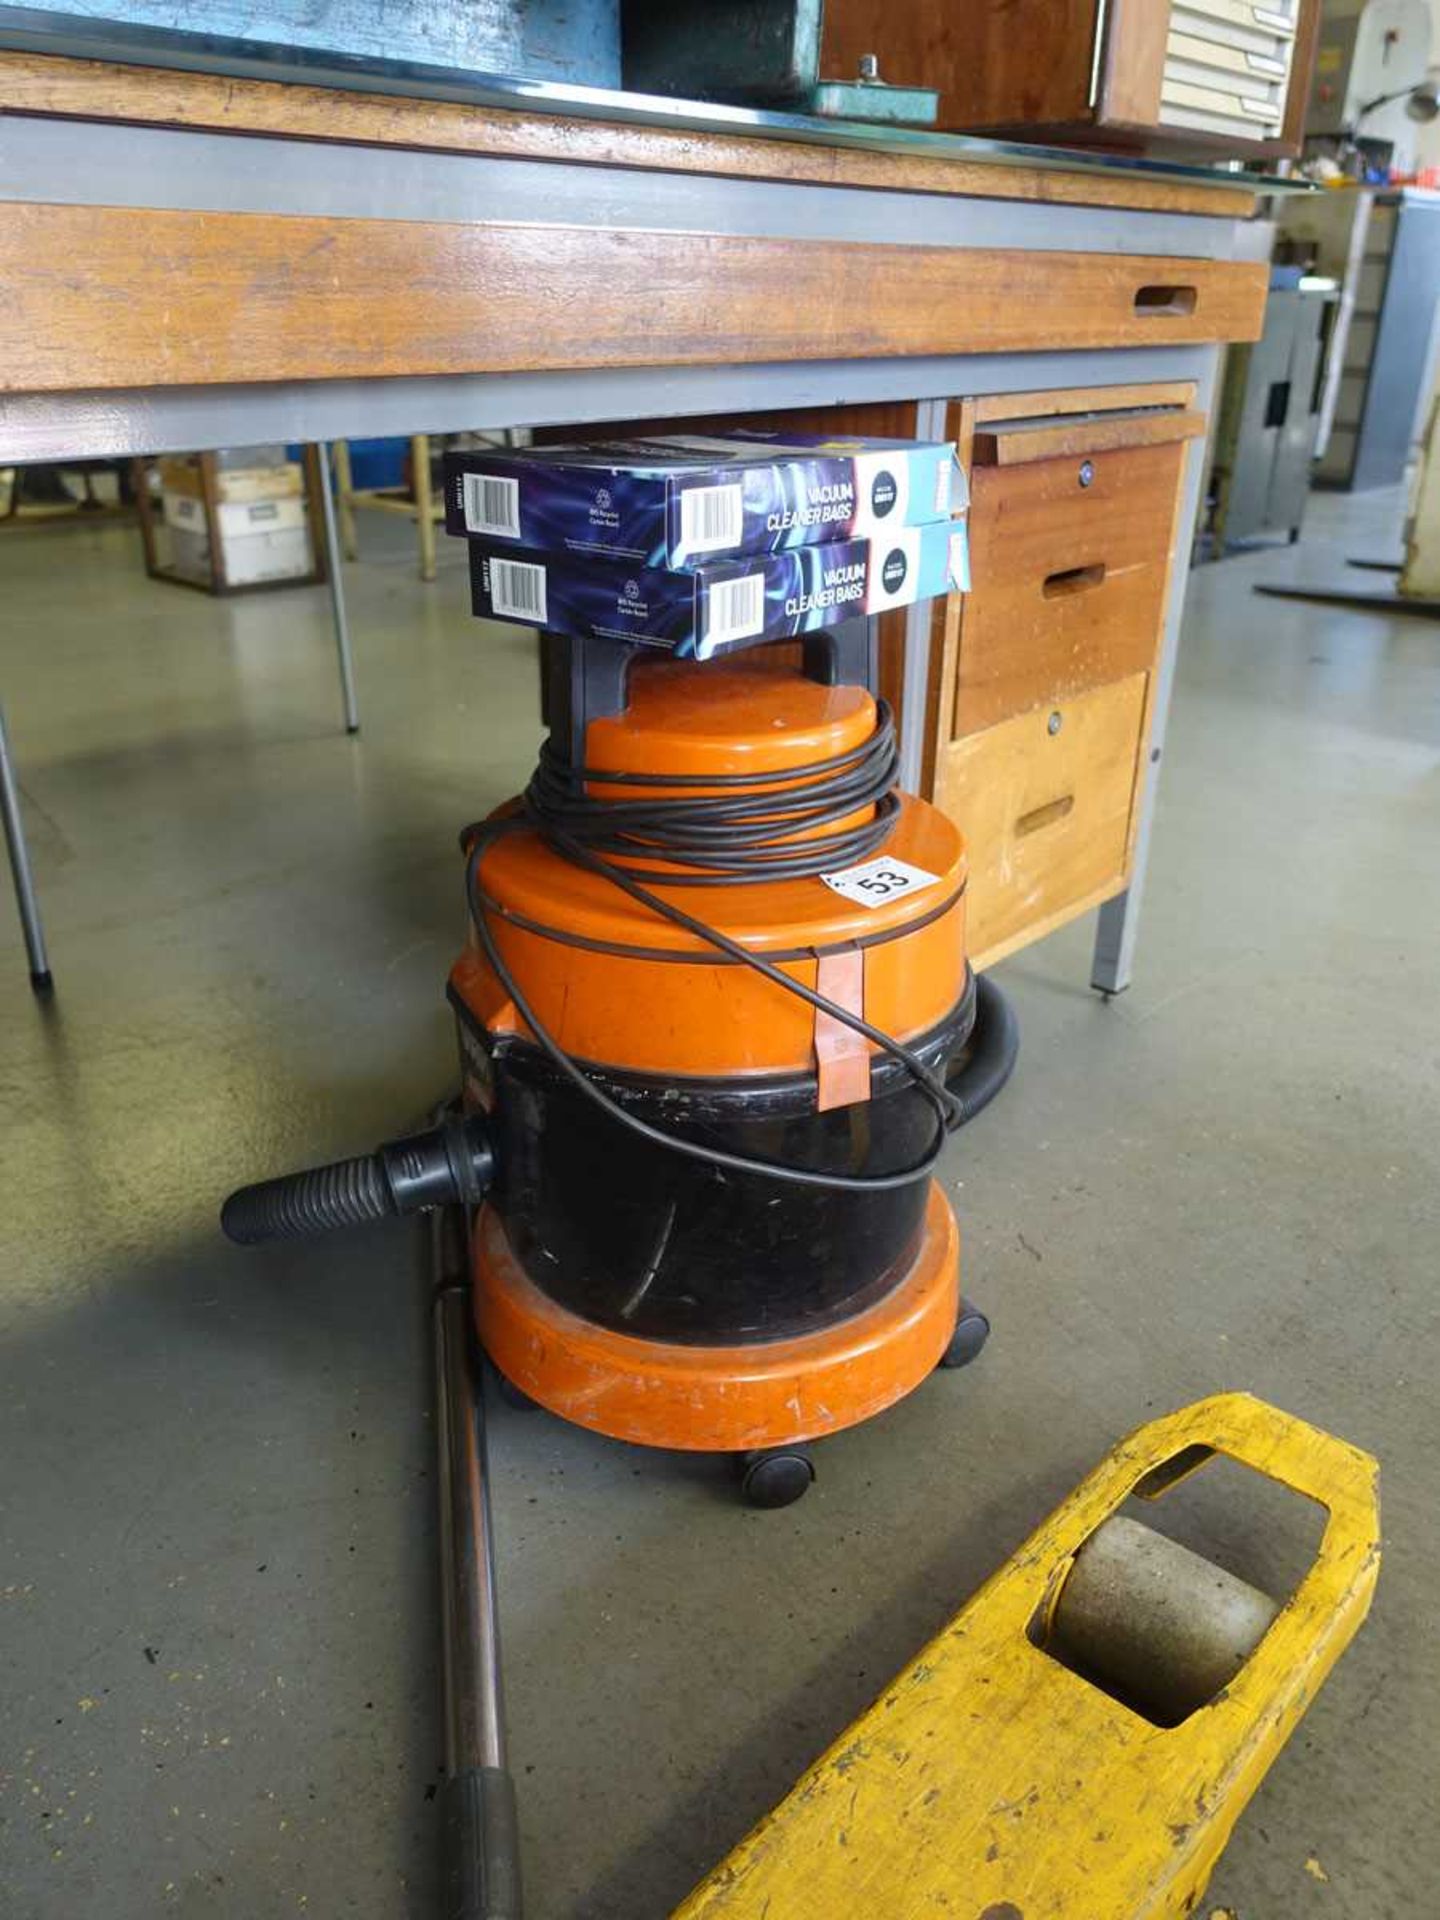 +VAT Vax 2000 drag along cylinder vacuum cleaner and spare bags